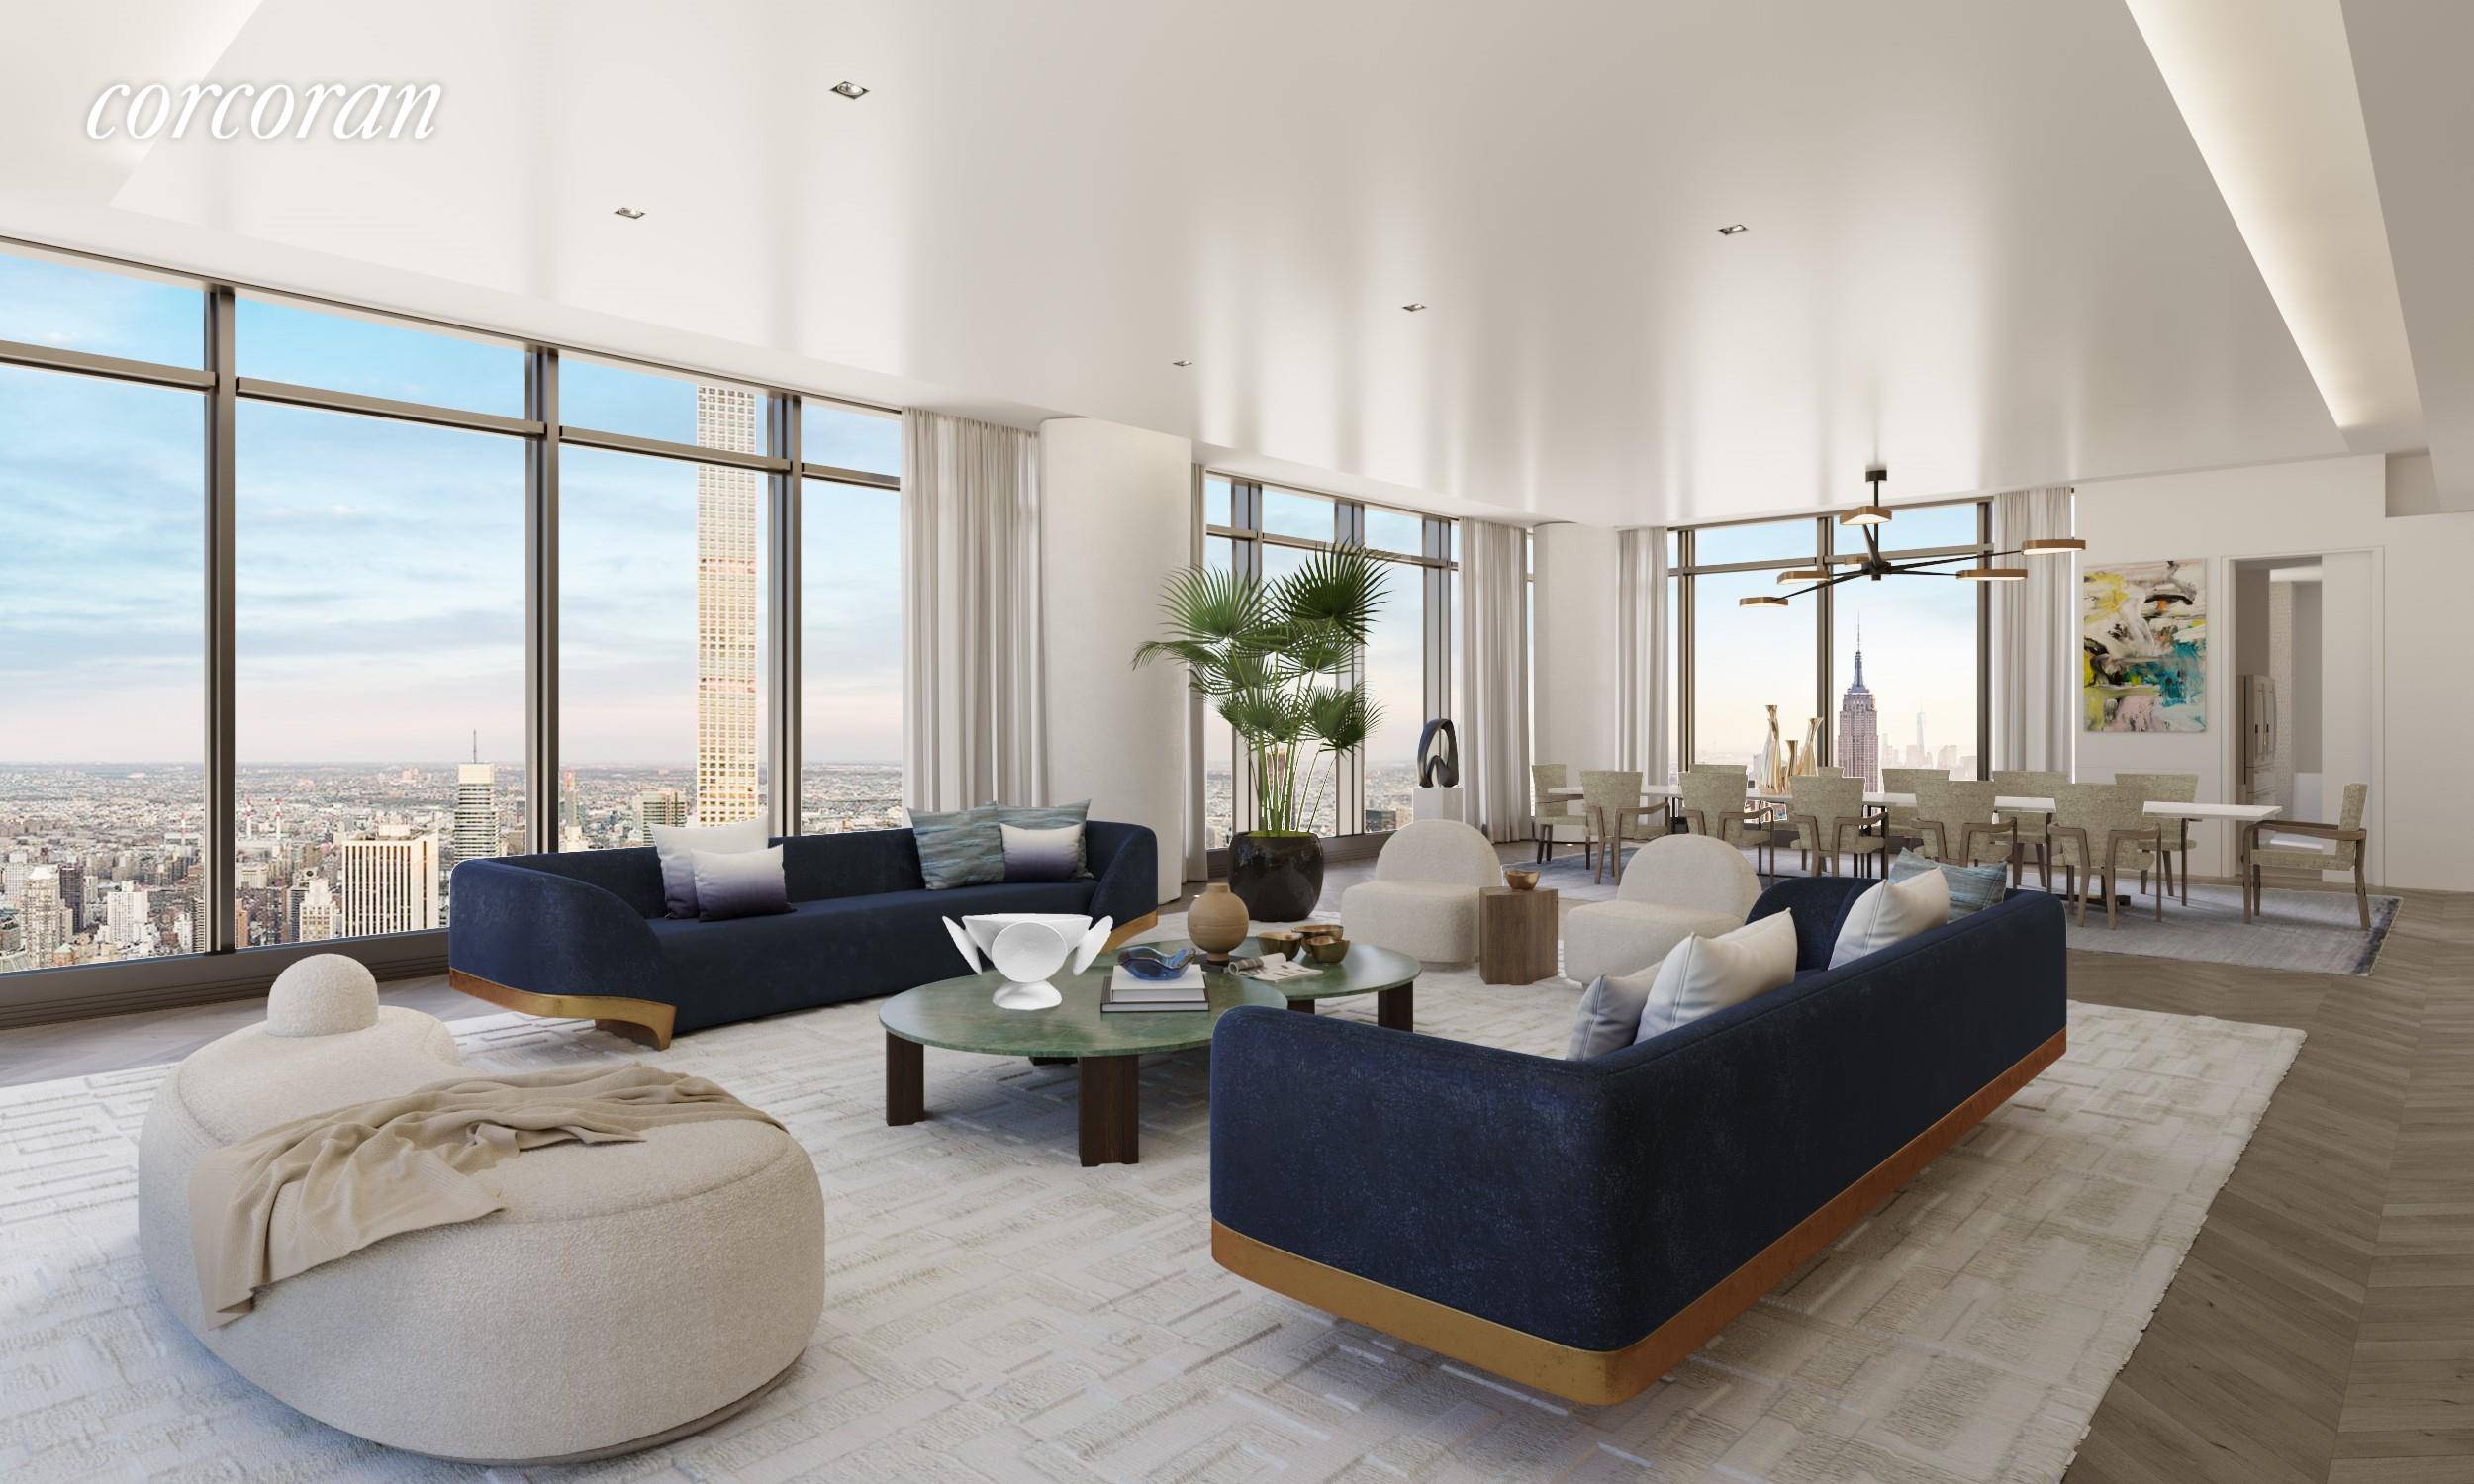 Residence 122 at Central Park Tower is an extraordinary full floor residence offering a perfect balance of space, privacy, dramatic views, and design.